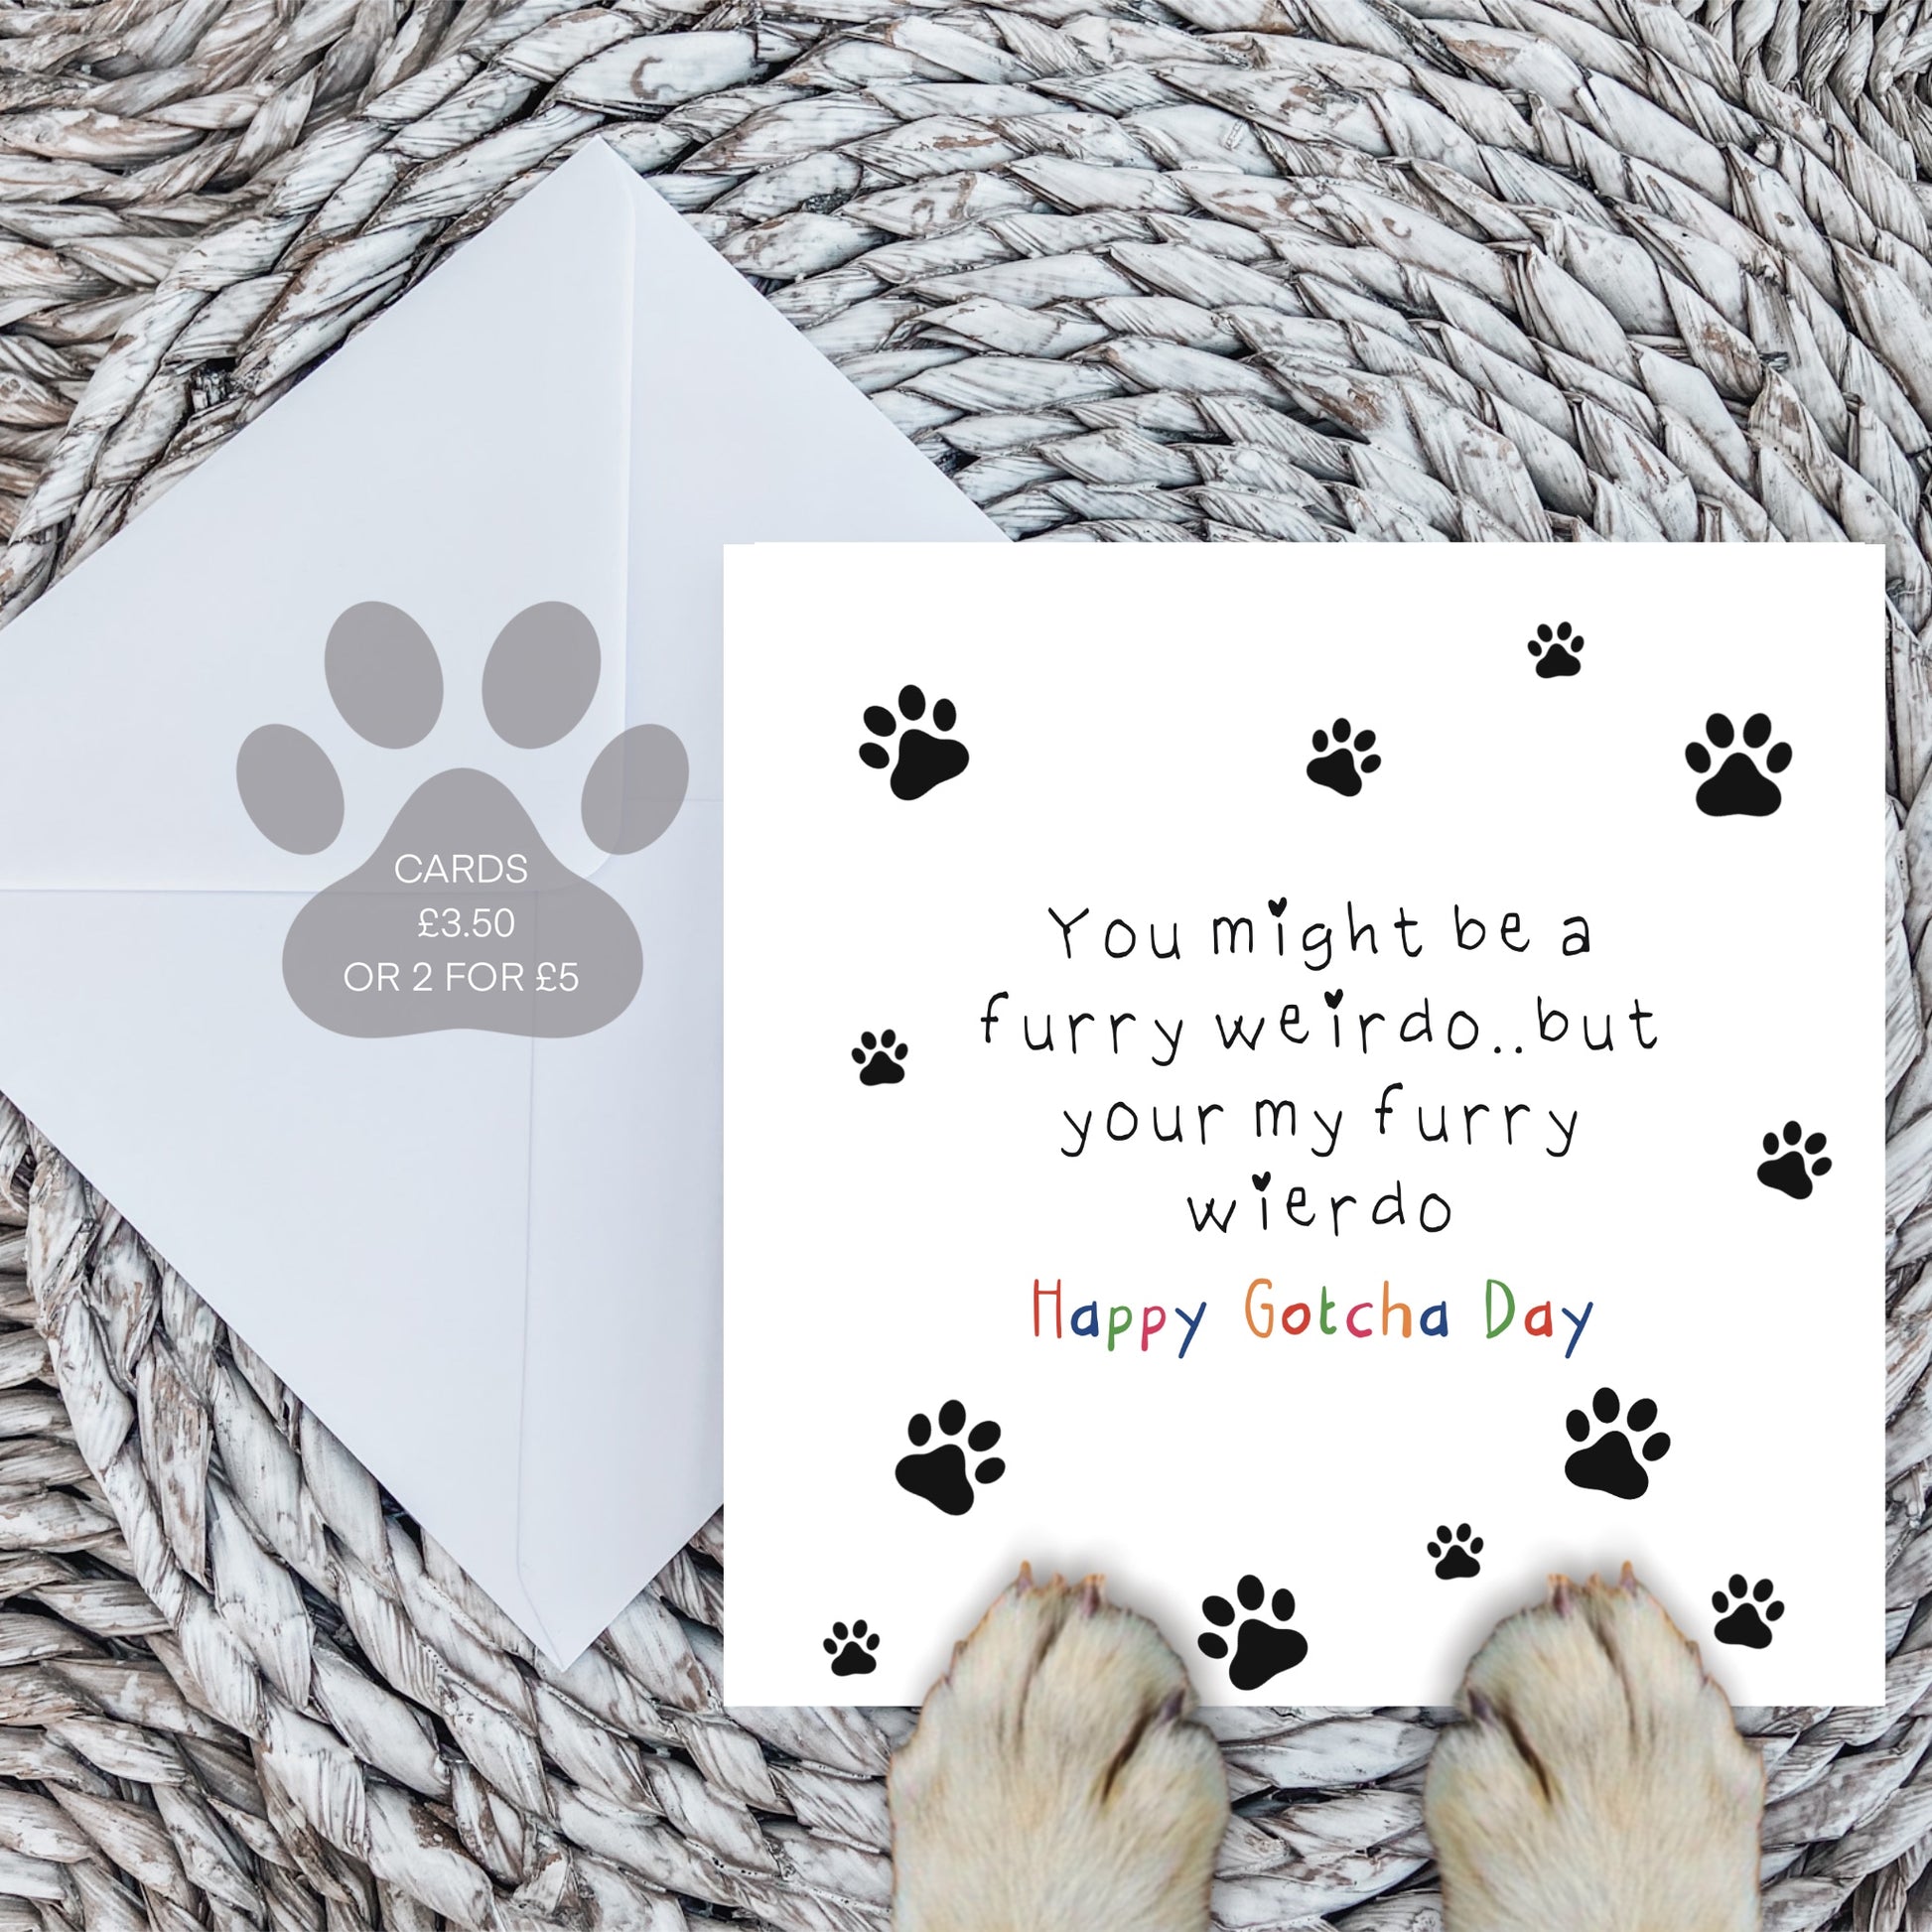 gotcha day card for dog, got ha day card for cat, gotcha day anniversary card, card for my dog, dogs birthday card, gift for dog, gift for cat, funny card